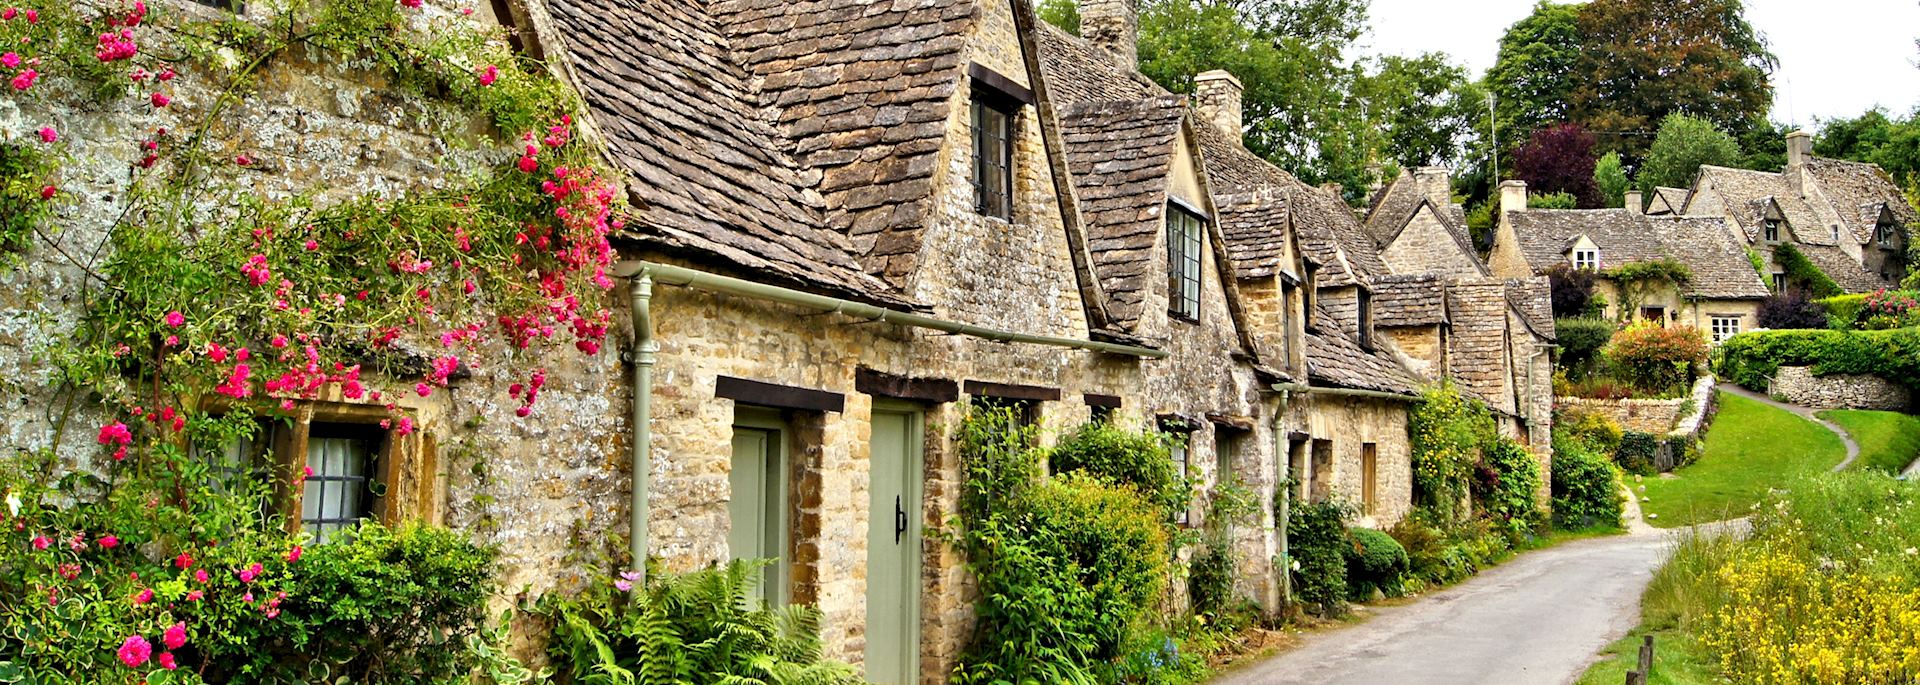 Bibury village in the Cotswolds, England